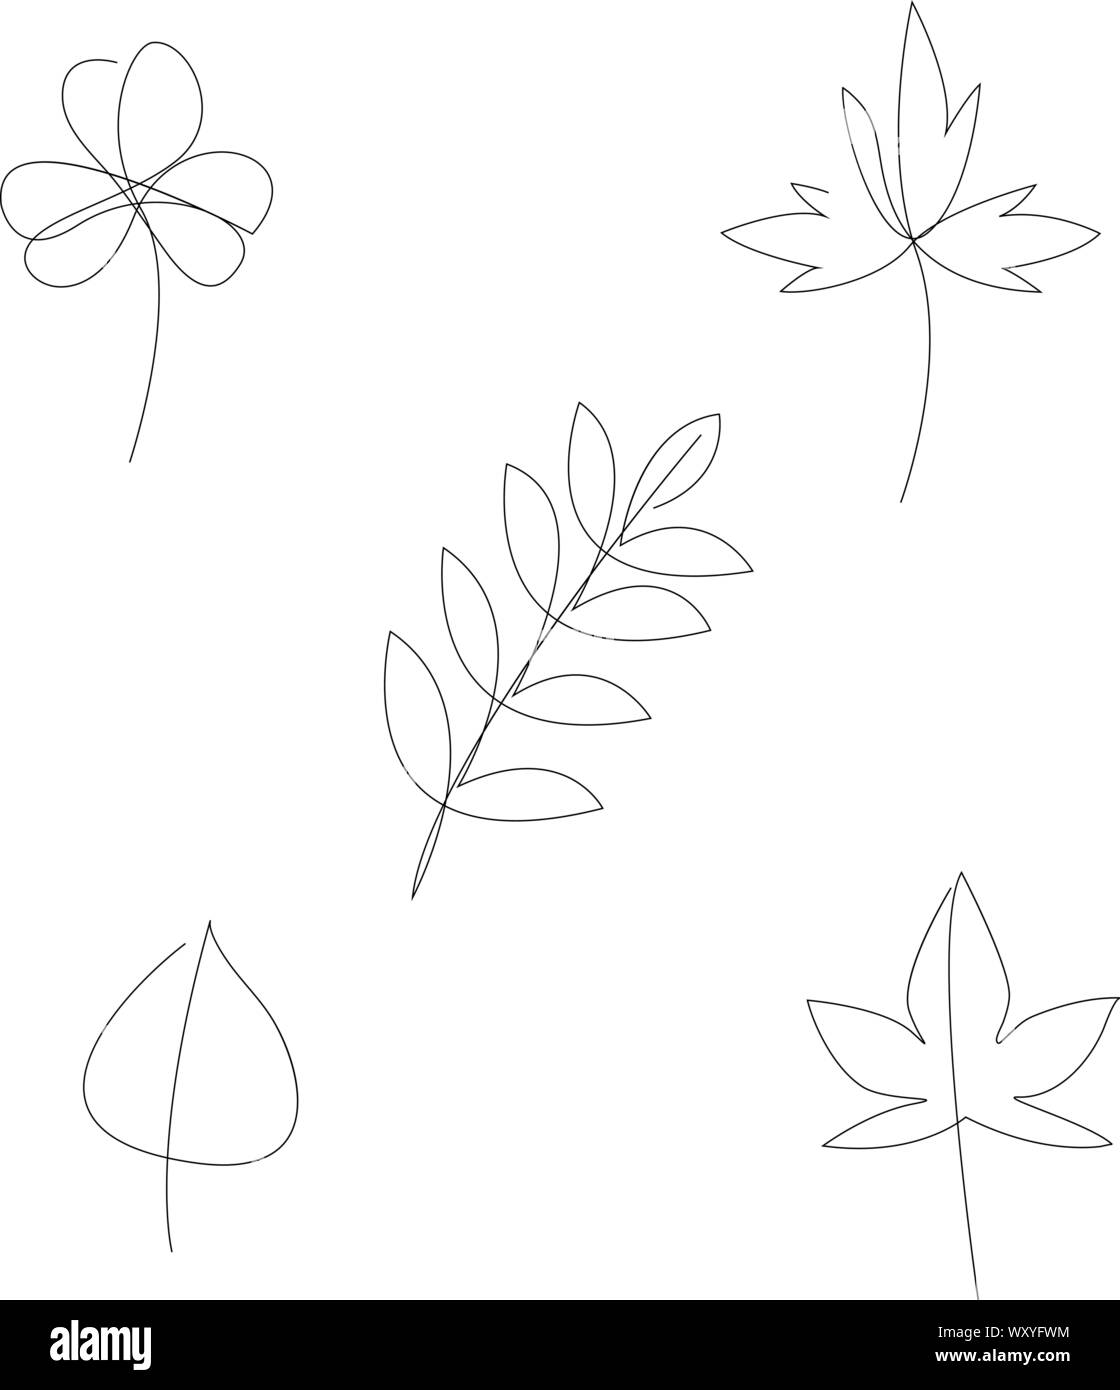 Simple leaves one line drawing vector illustration Stock Vector